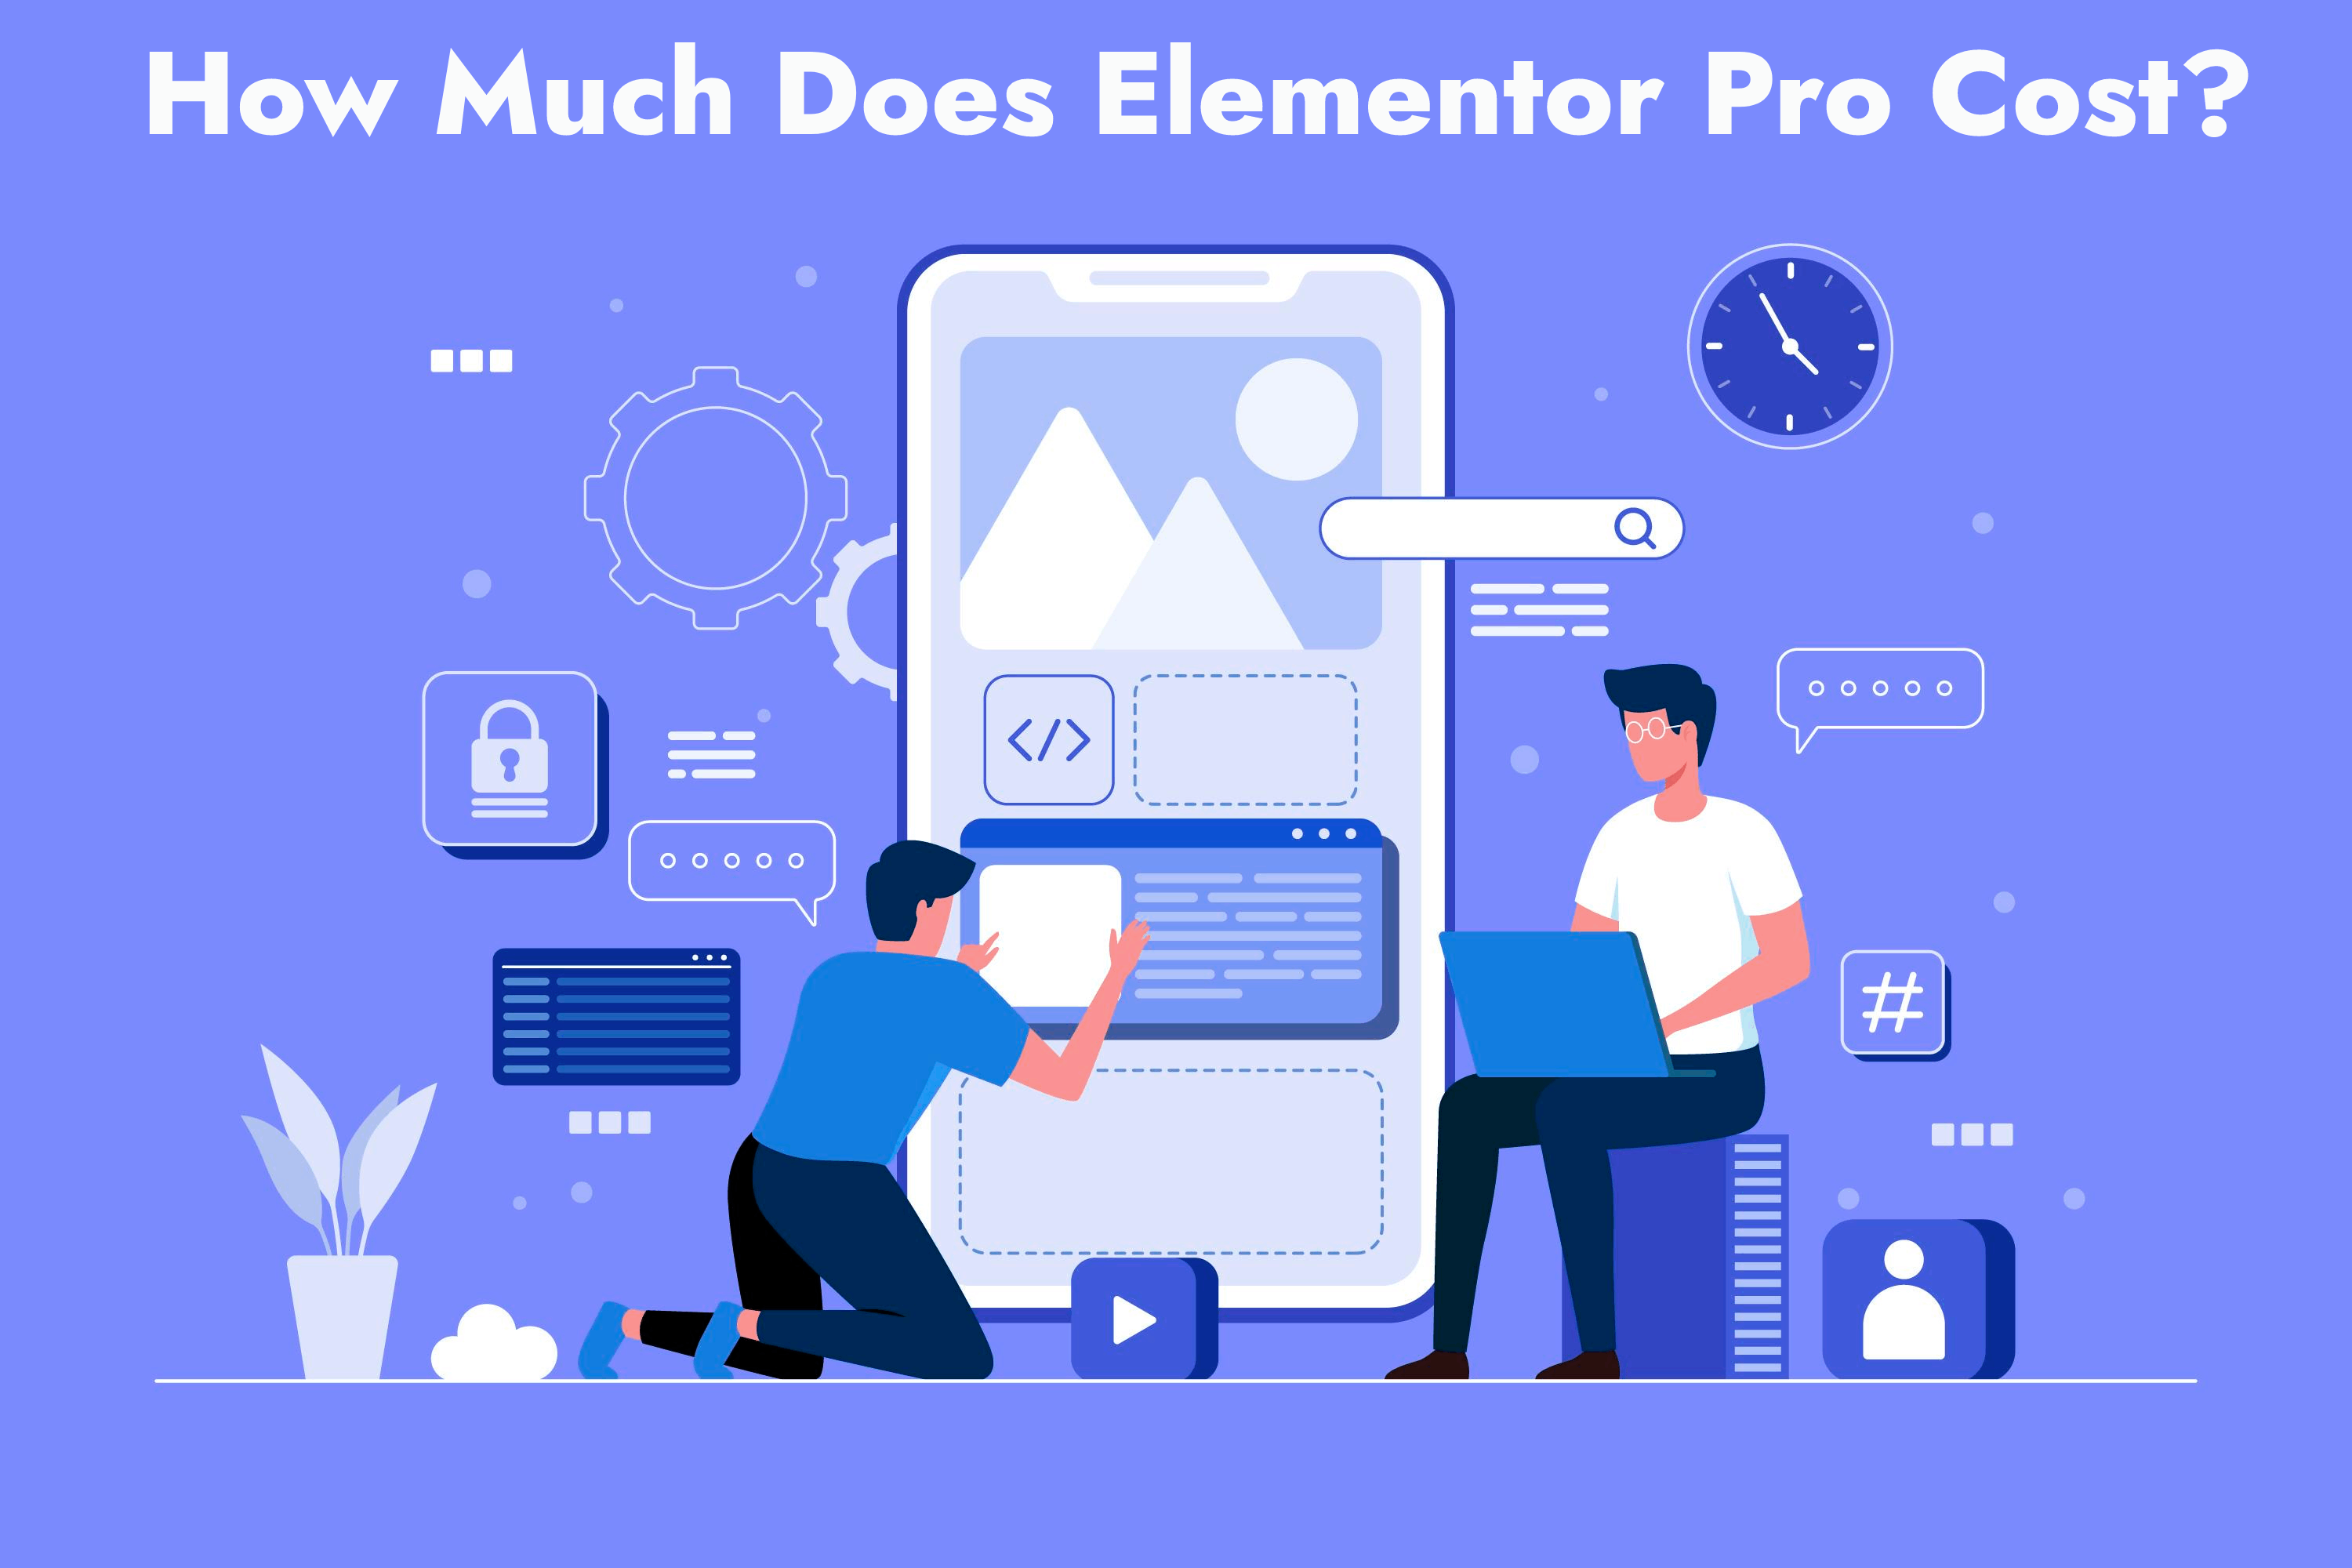 How Much Does Elementor Pro Cost?